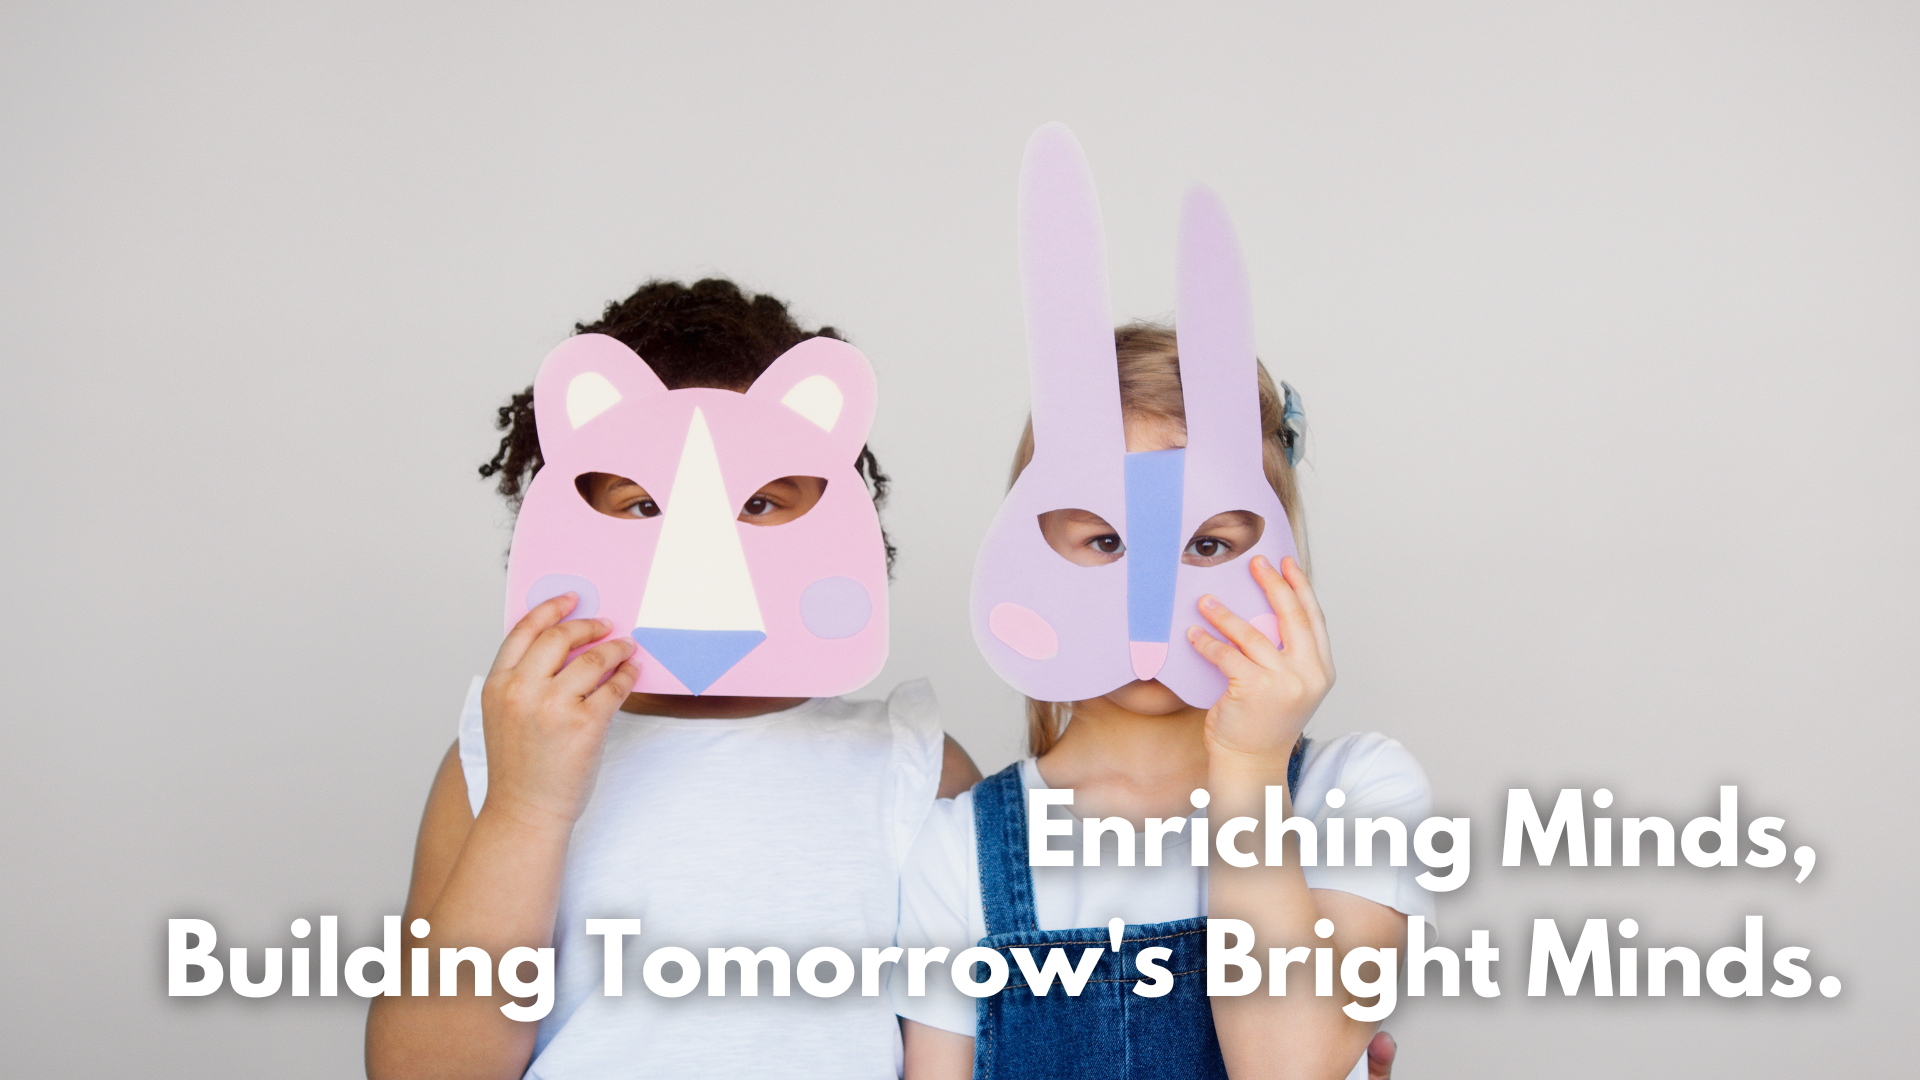 Enriching Minds, Building Tomorrow's Bright Minds.